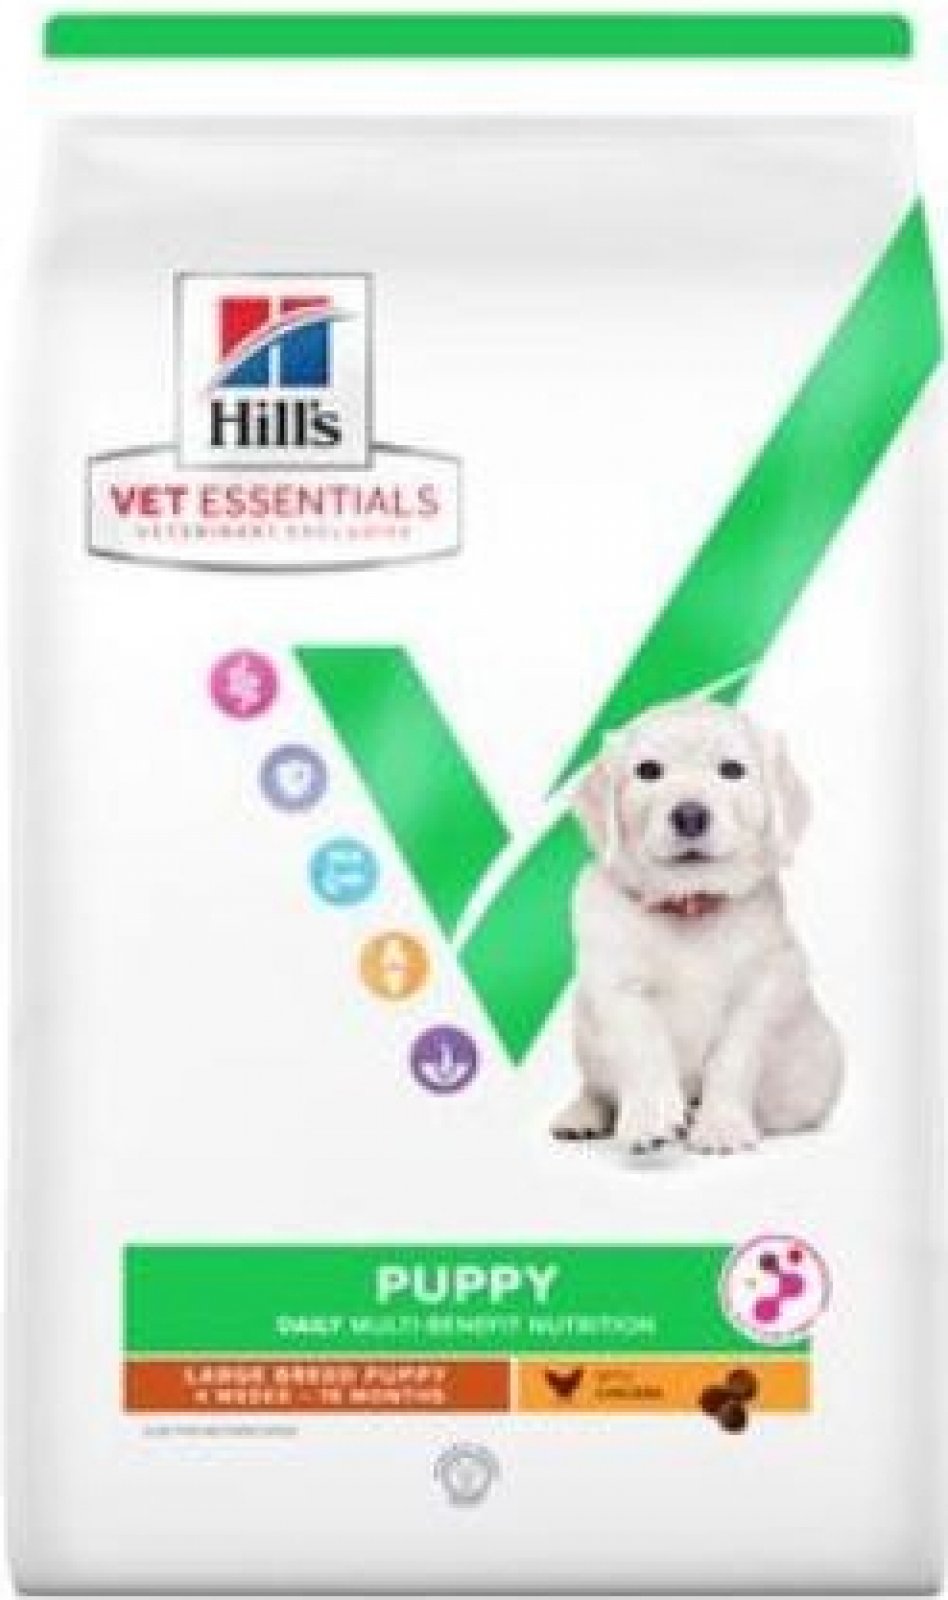 Hill's VetEssentials Canine Puppy Large Breed chicken 700g